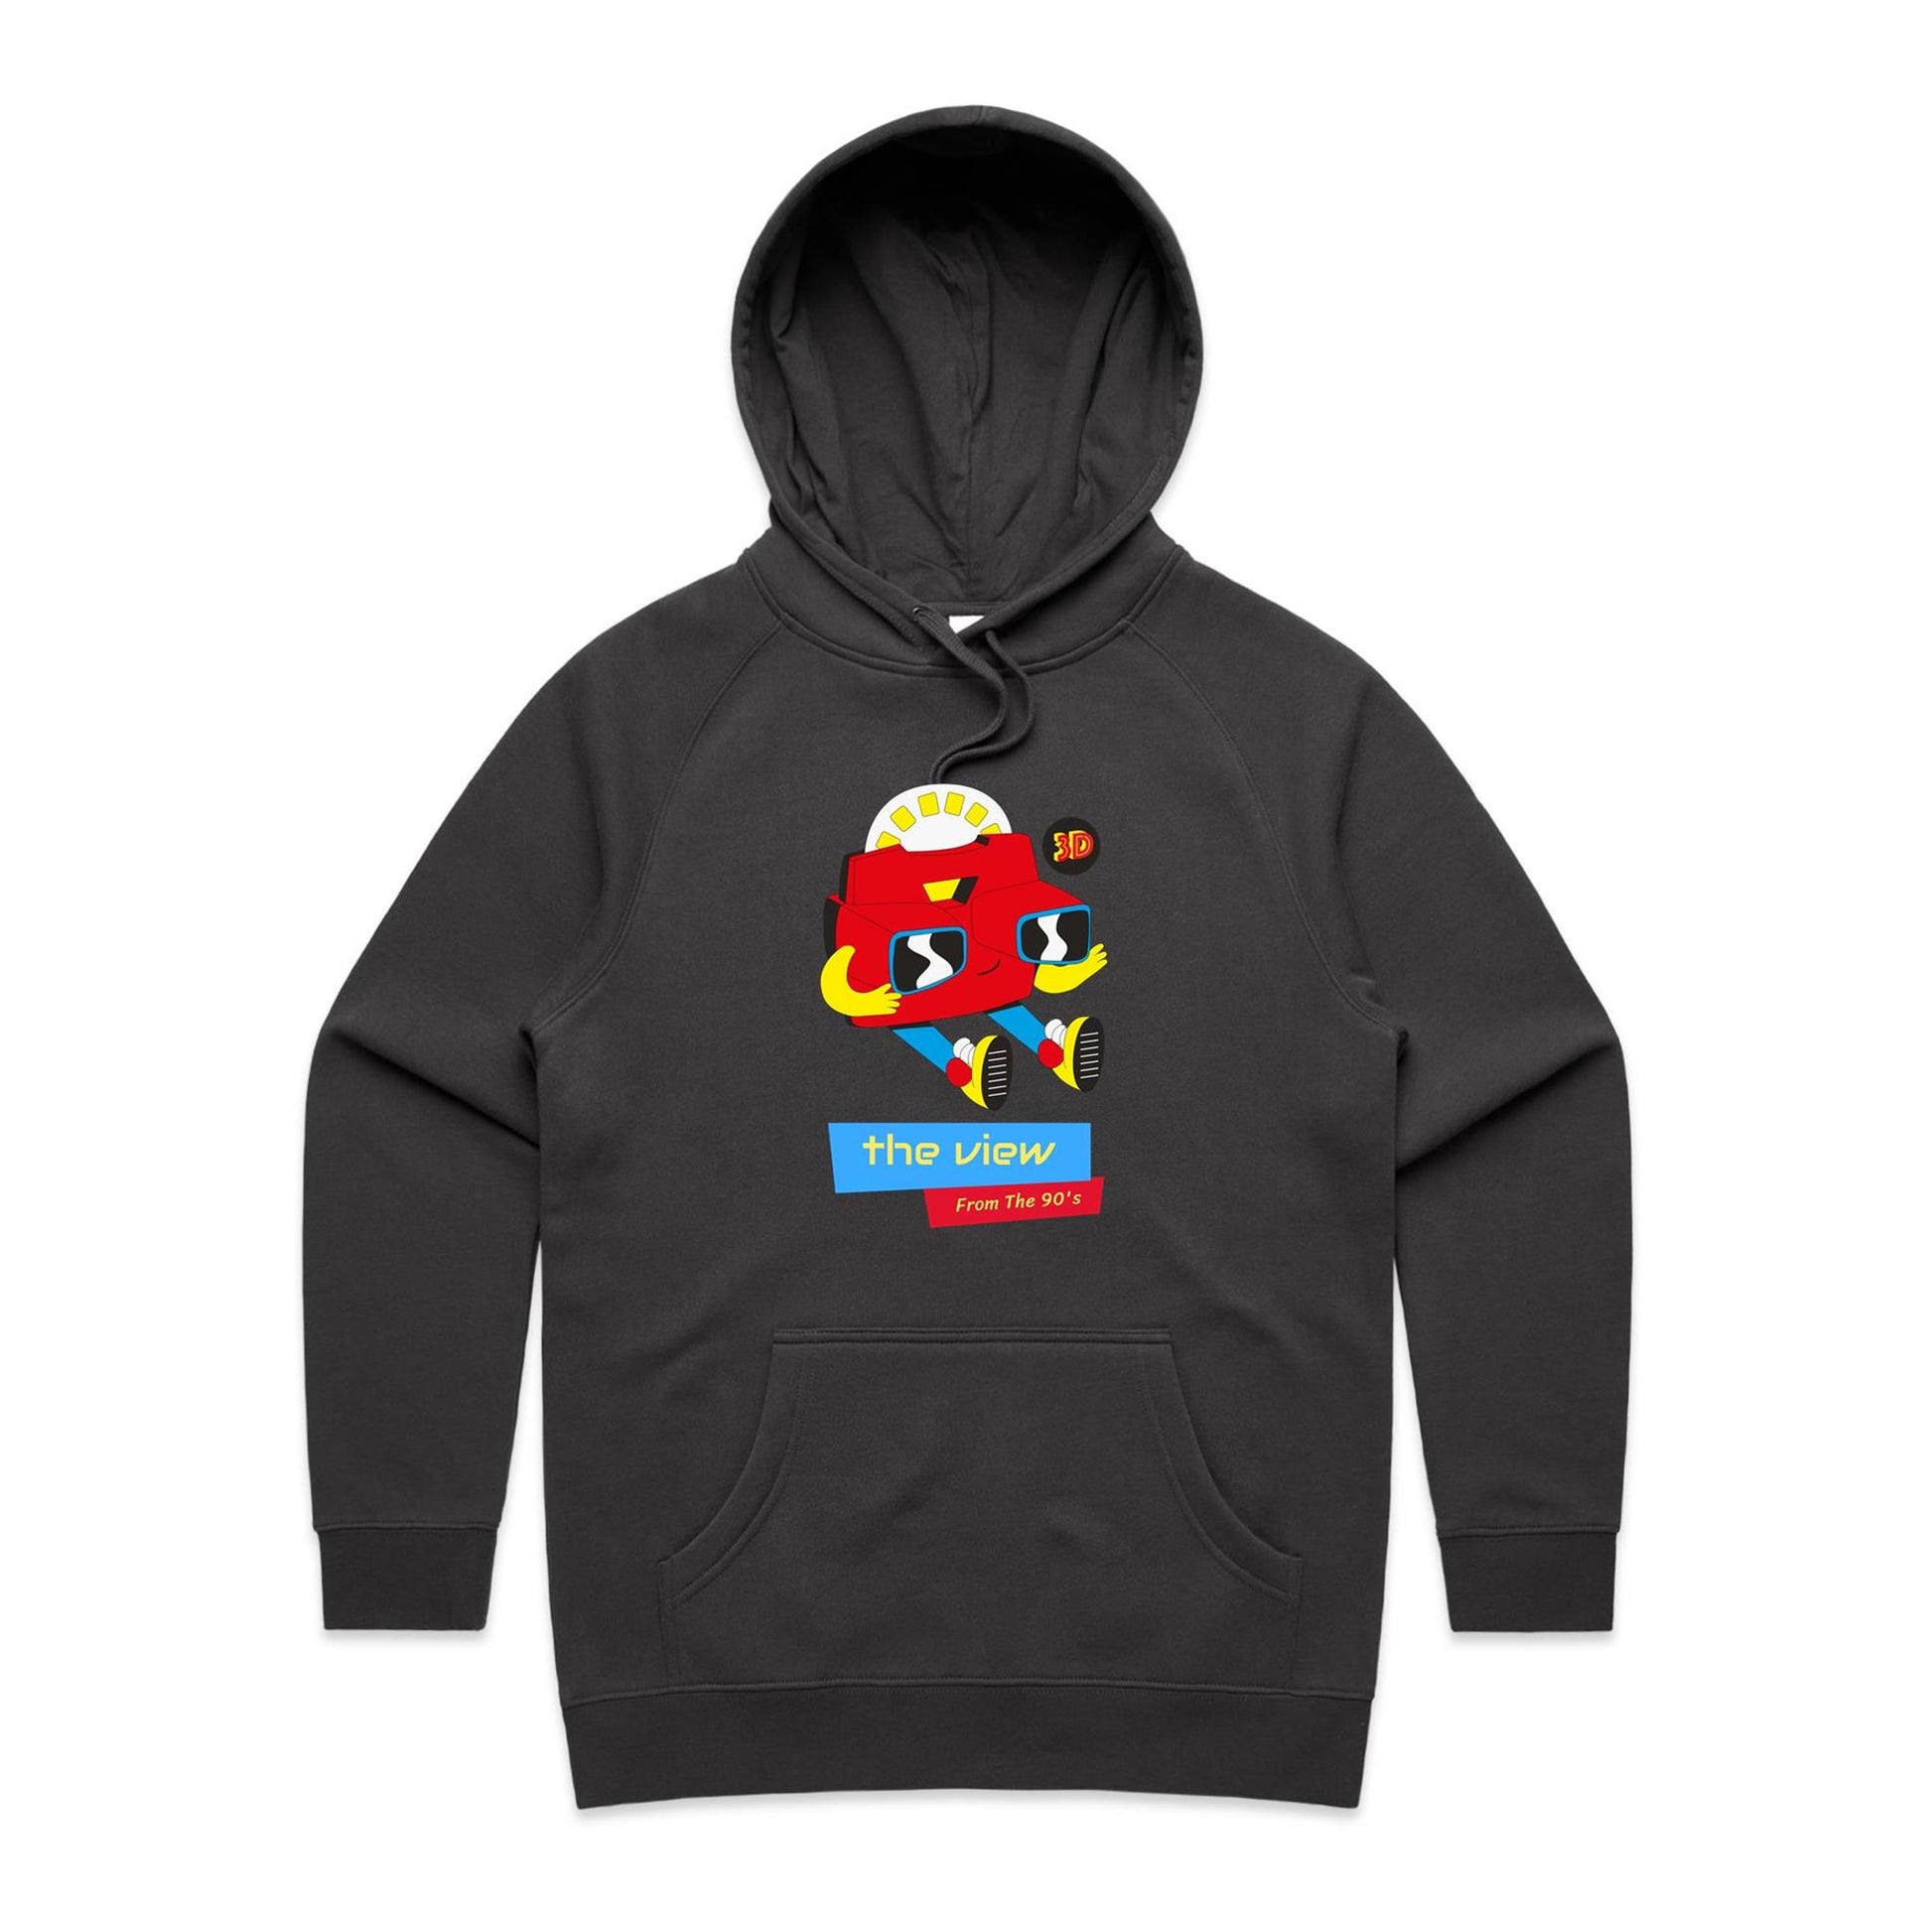 The View From The 90's - Women's Supply Hood Coal Womens Supply Hoodie Retro